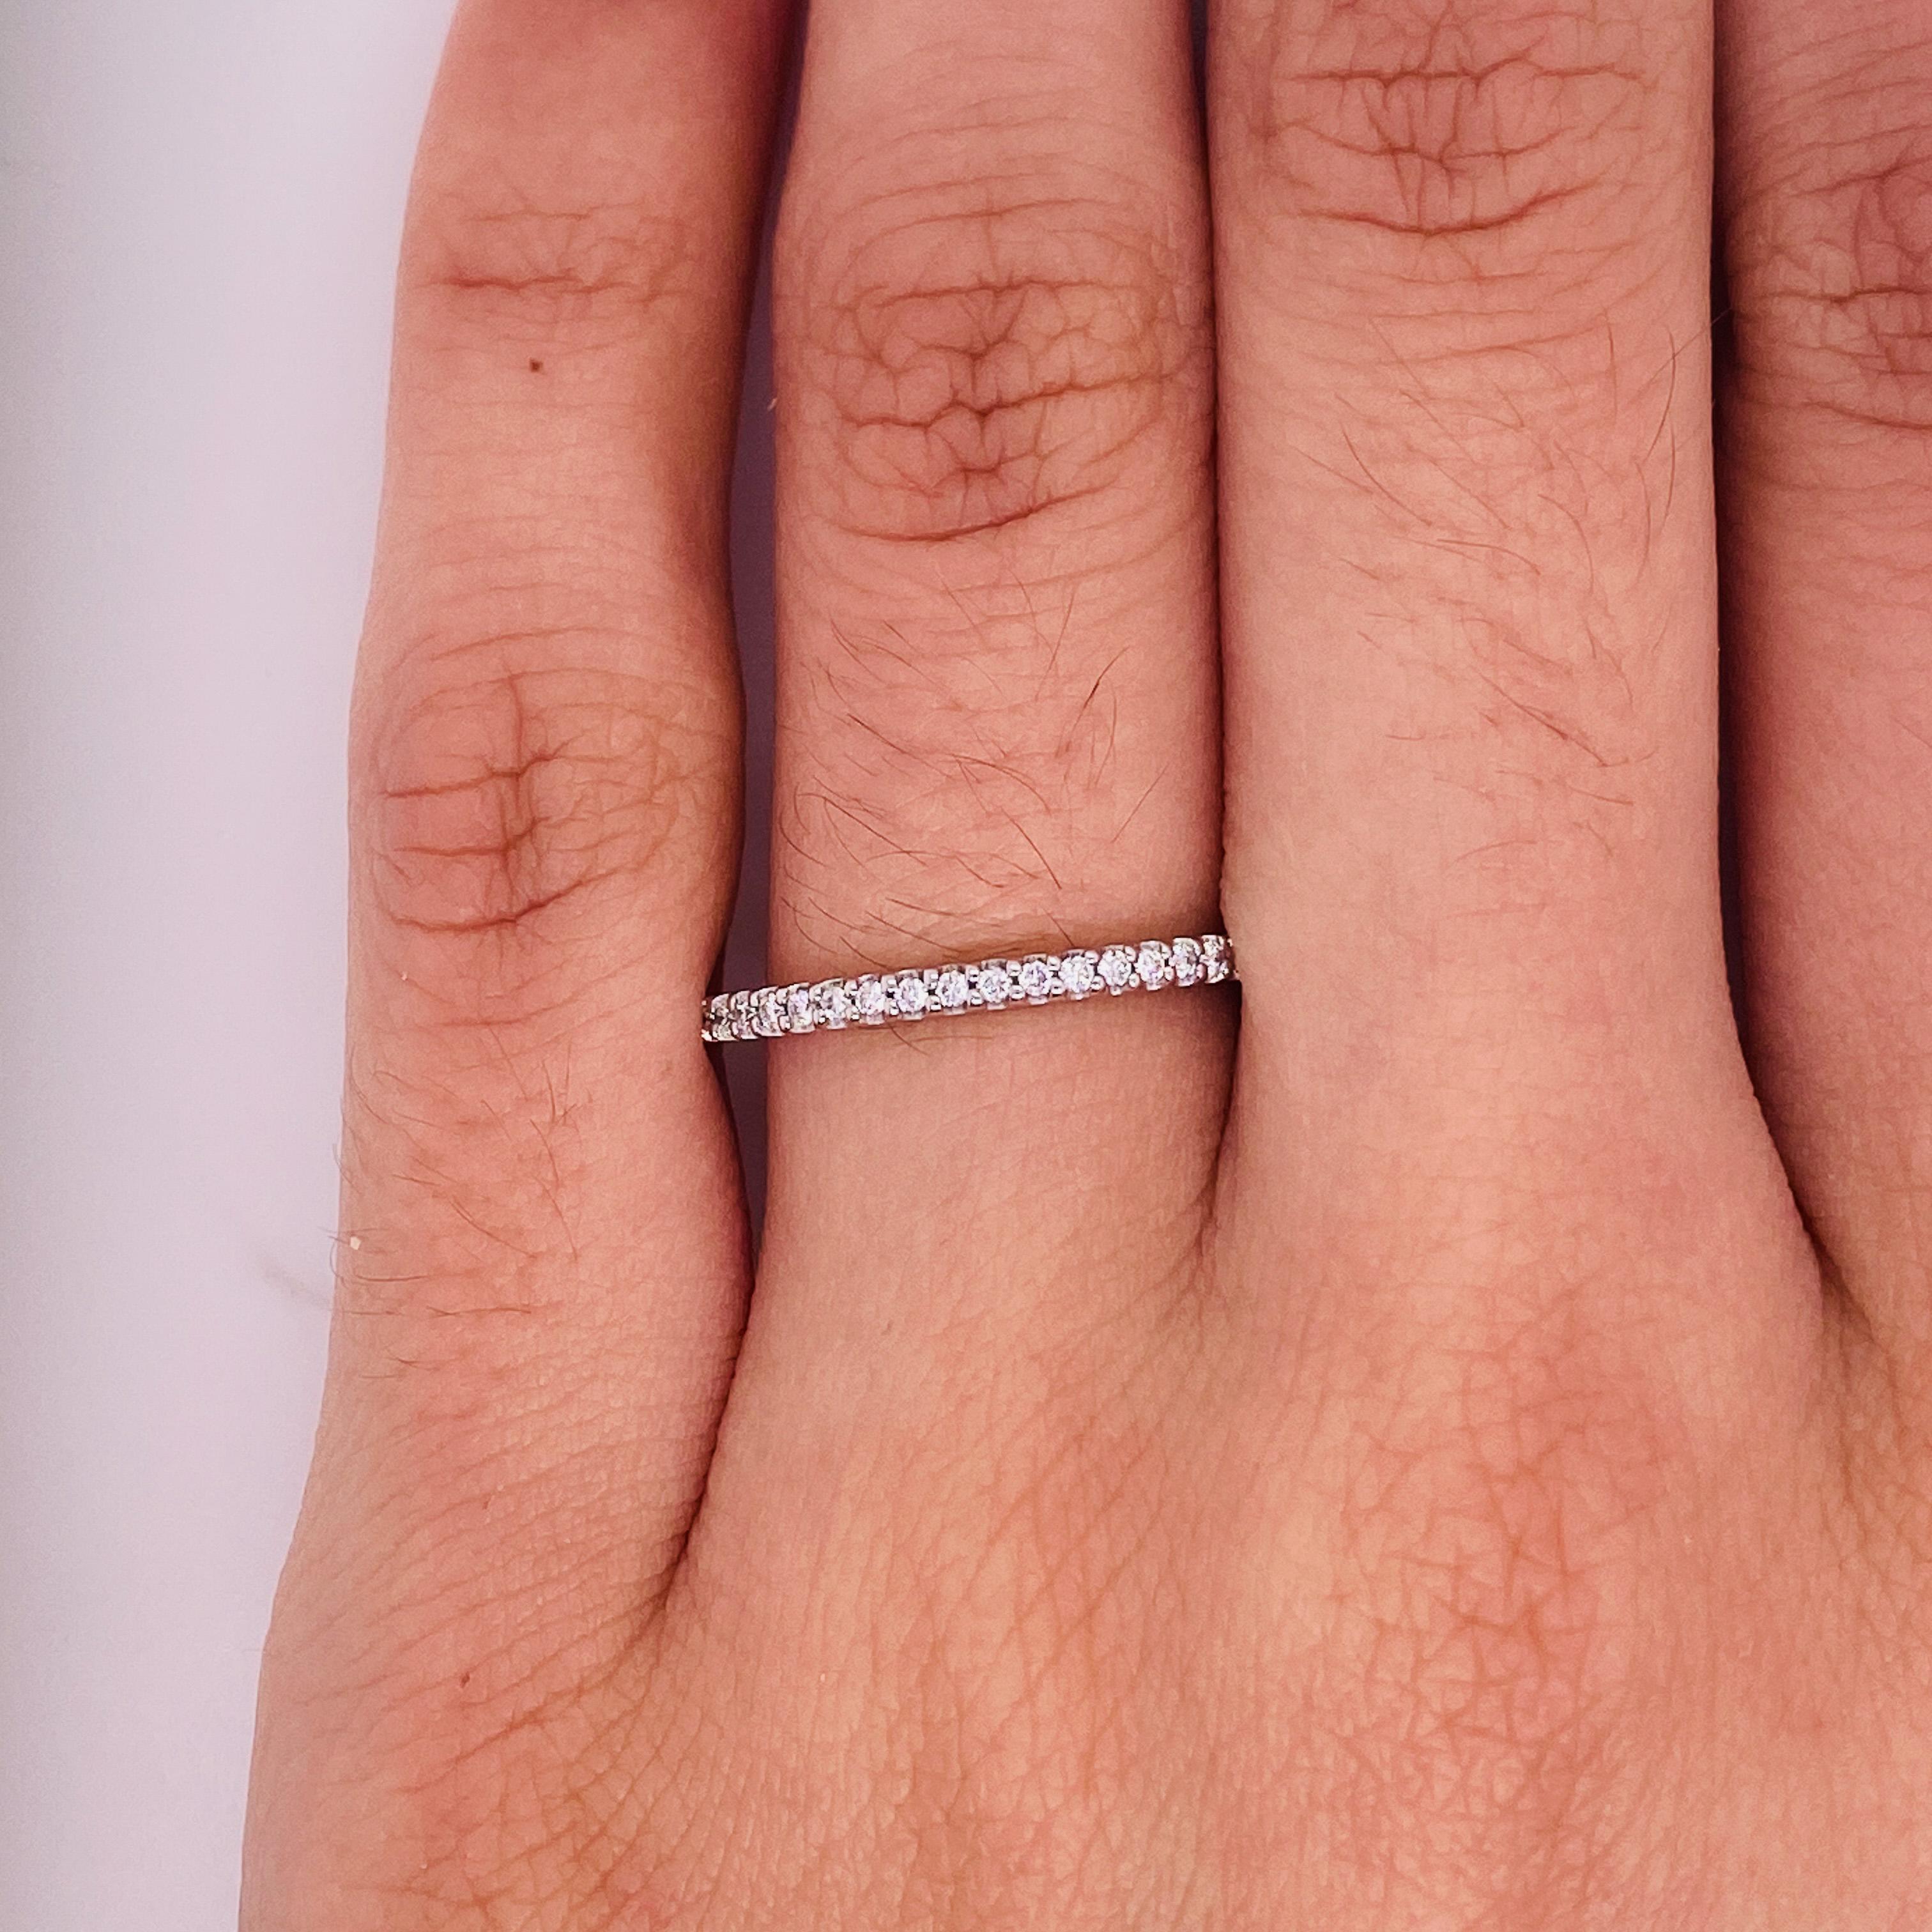 For Sale:  Diamond Half Eternity Band in 14k White Gold .13 Carat Round Diamond Stackable 4